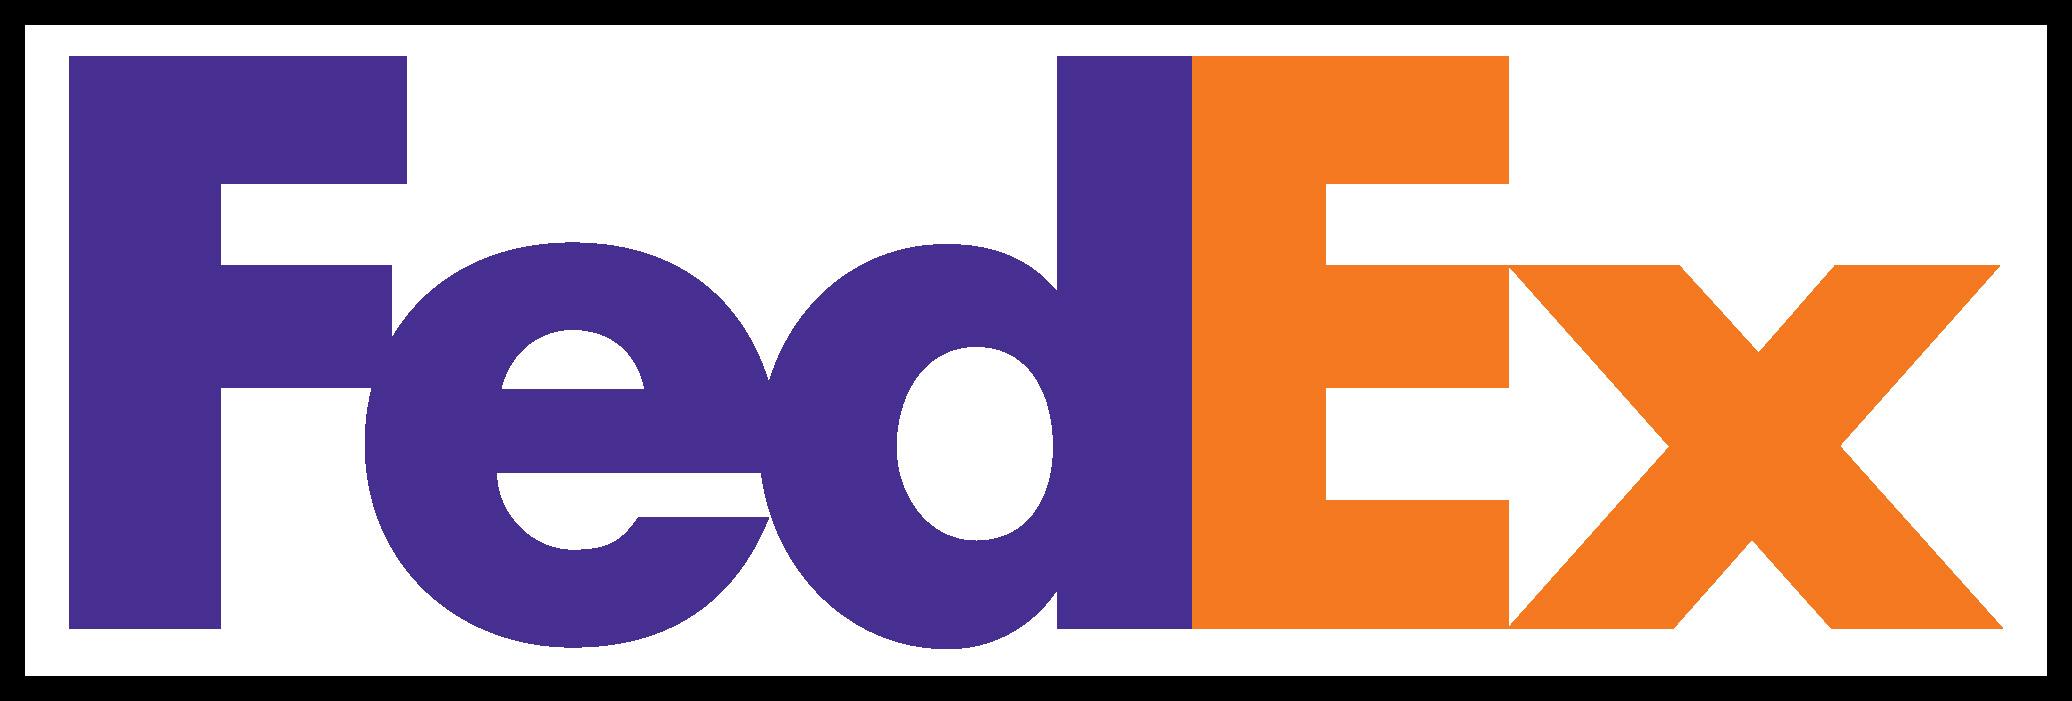 FedEx Ex Logo - The Heart of Innovation: What You Can Learn from the FedEx Logo